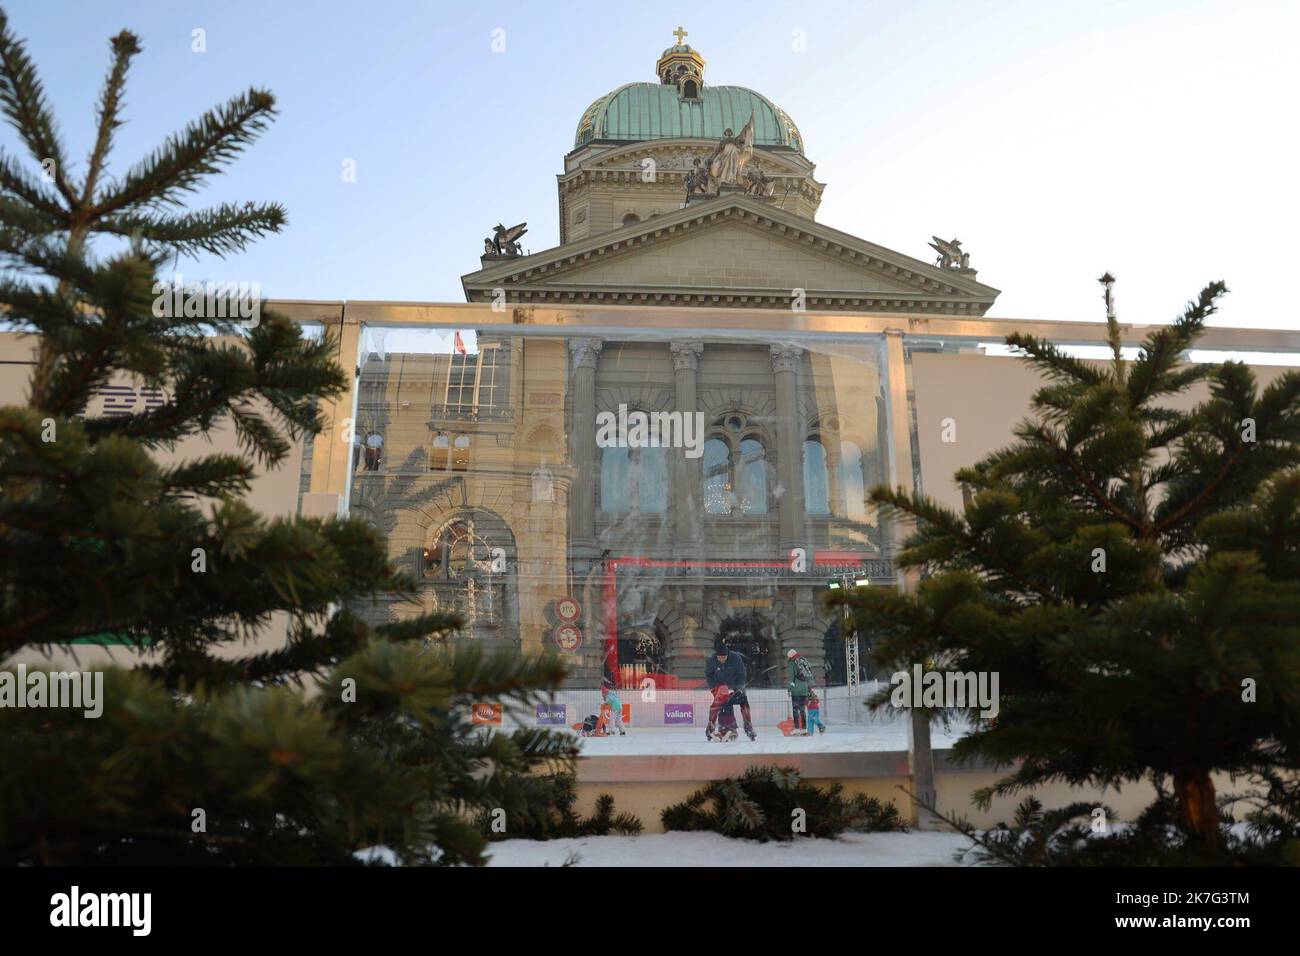 ©francois Glories/MAXPPP - Since the end of the year and during the whole month of January, an ephemeral ice rink has been installed on the 'Bundesplatz' (federal square) in front of the Swiss Parliament building and the 'Schweizerische Nationalbank' (Swiss National Bank) for young and old. Switzerland Bern. January 13, 2022. Stock Photo